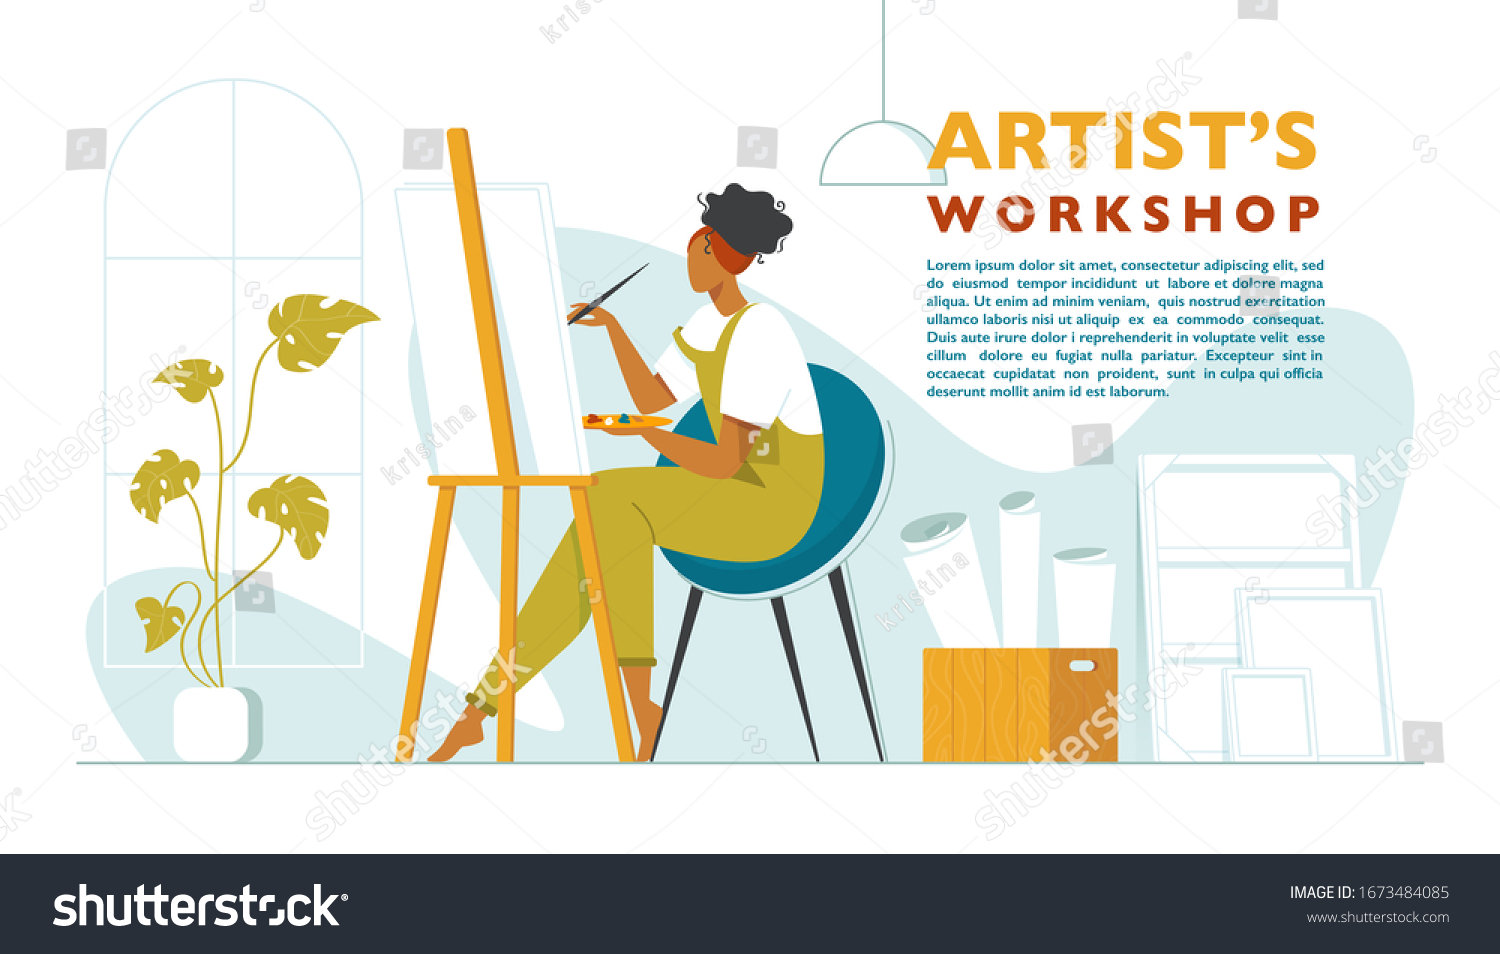 Cute woman paints on canvas in an art workshop. Artist creating picture. Art school or studio. Colorful vector illustration in flat style with a place for text. Artist's workshop poster #1673484085